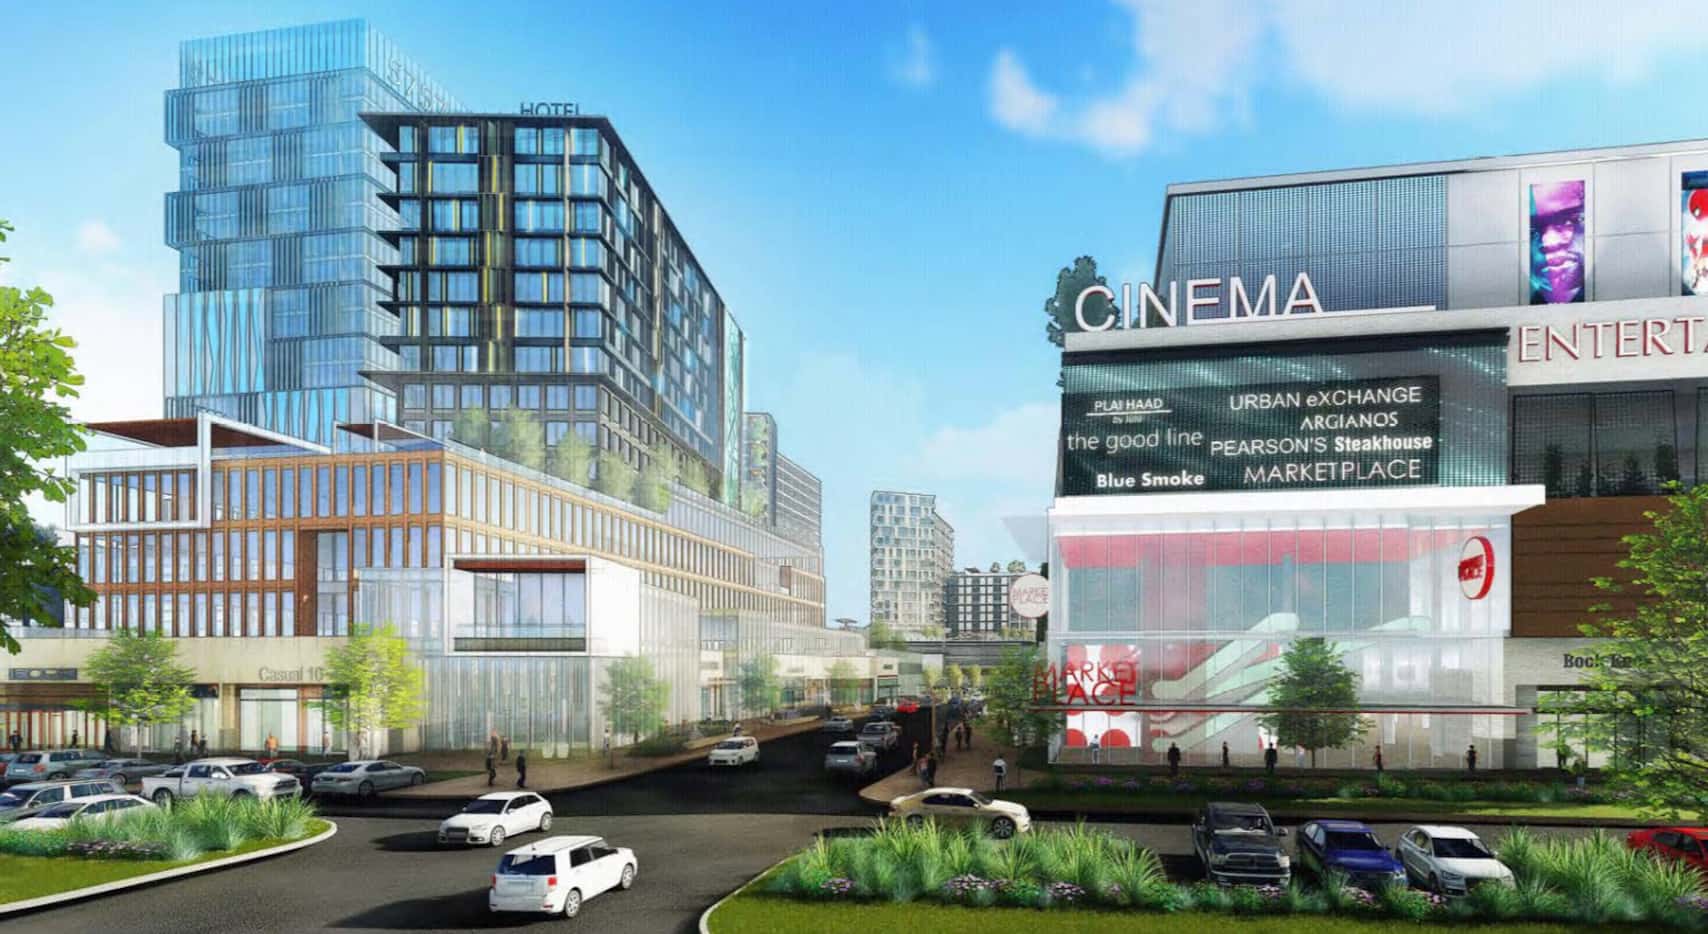 The development is planned to contain more than 360,000 square feet of retail and...